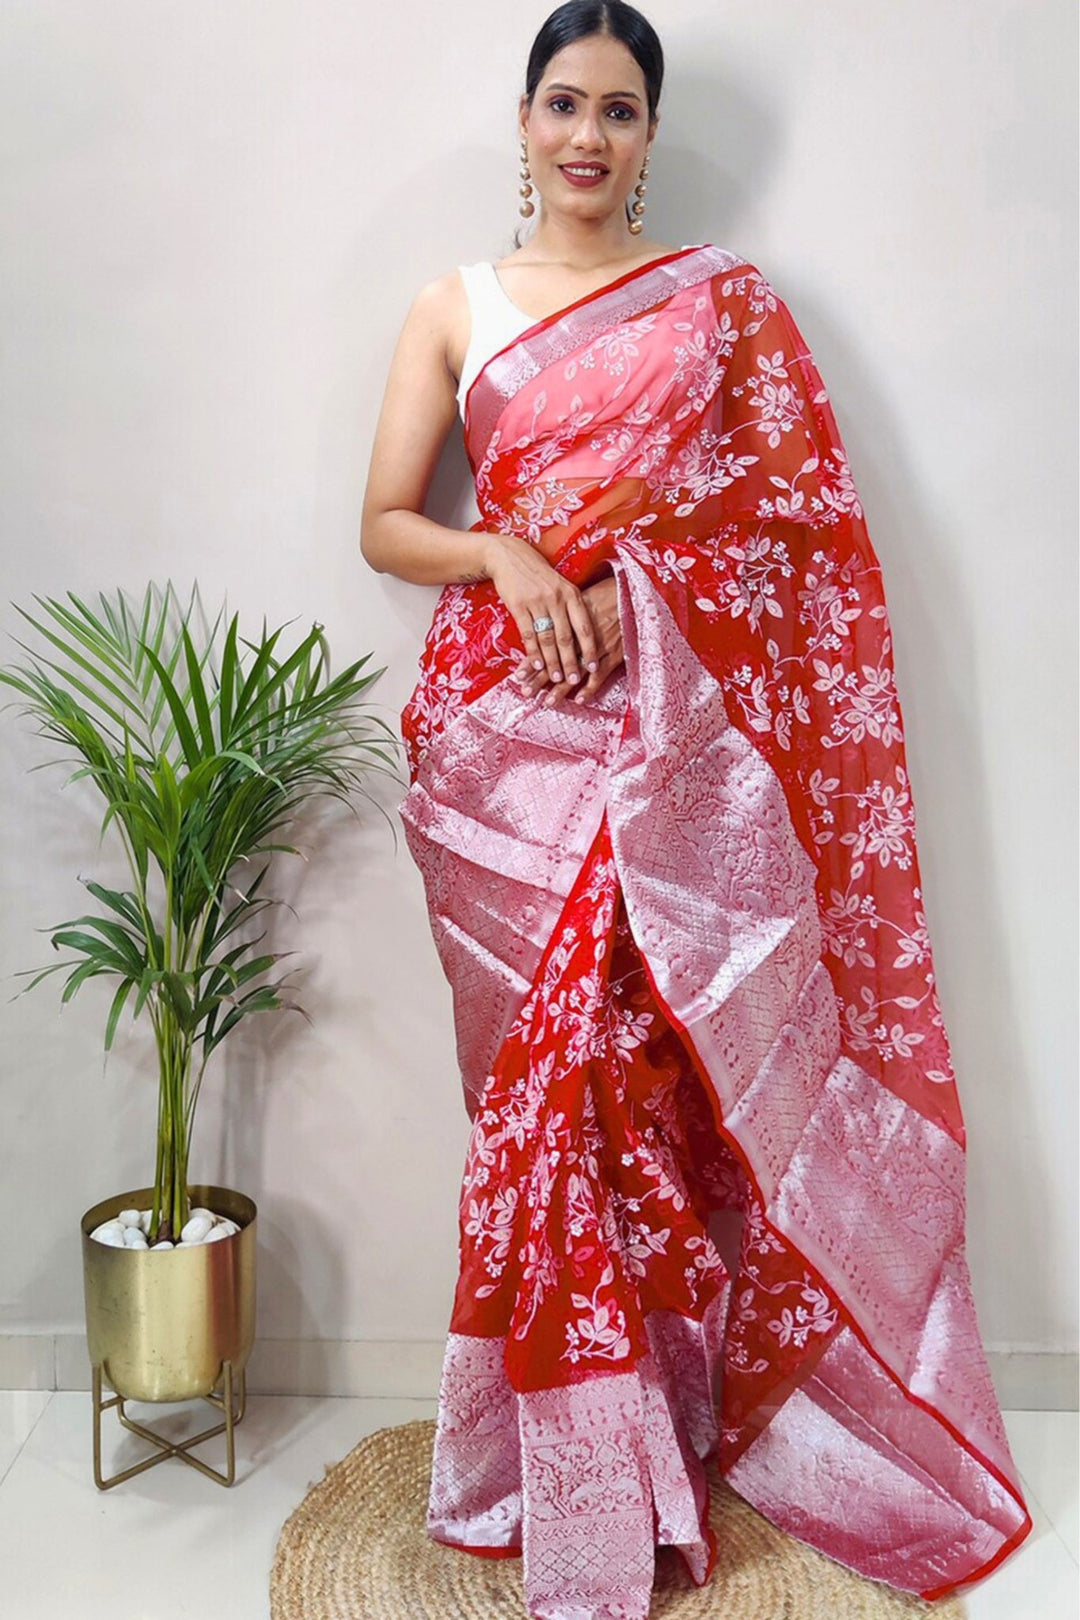 red saree with white blouse - white and red combination saree